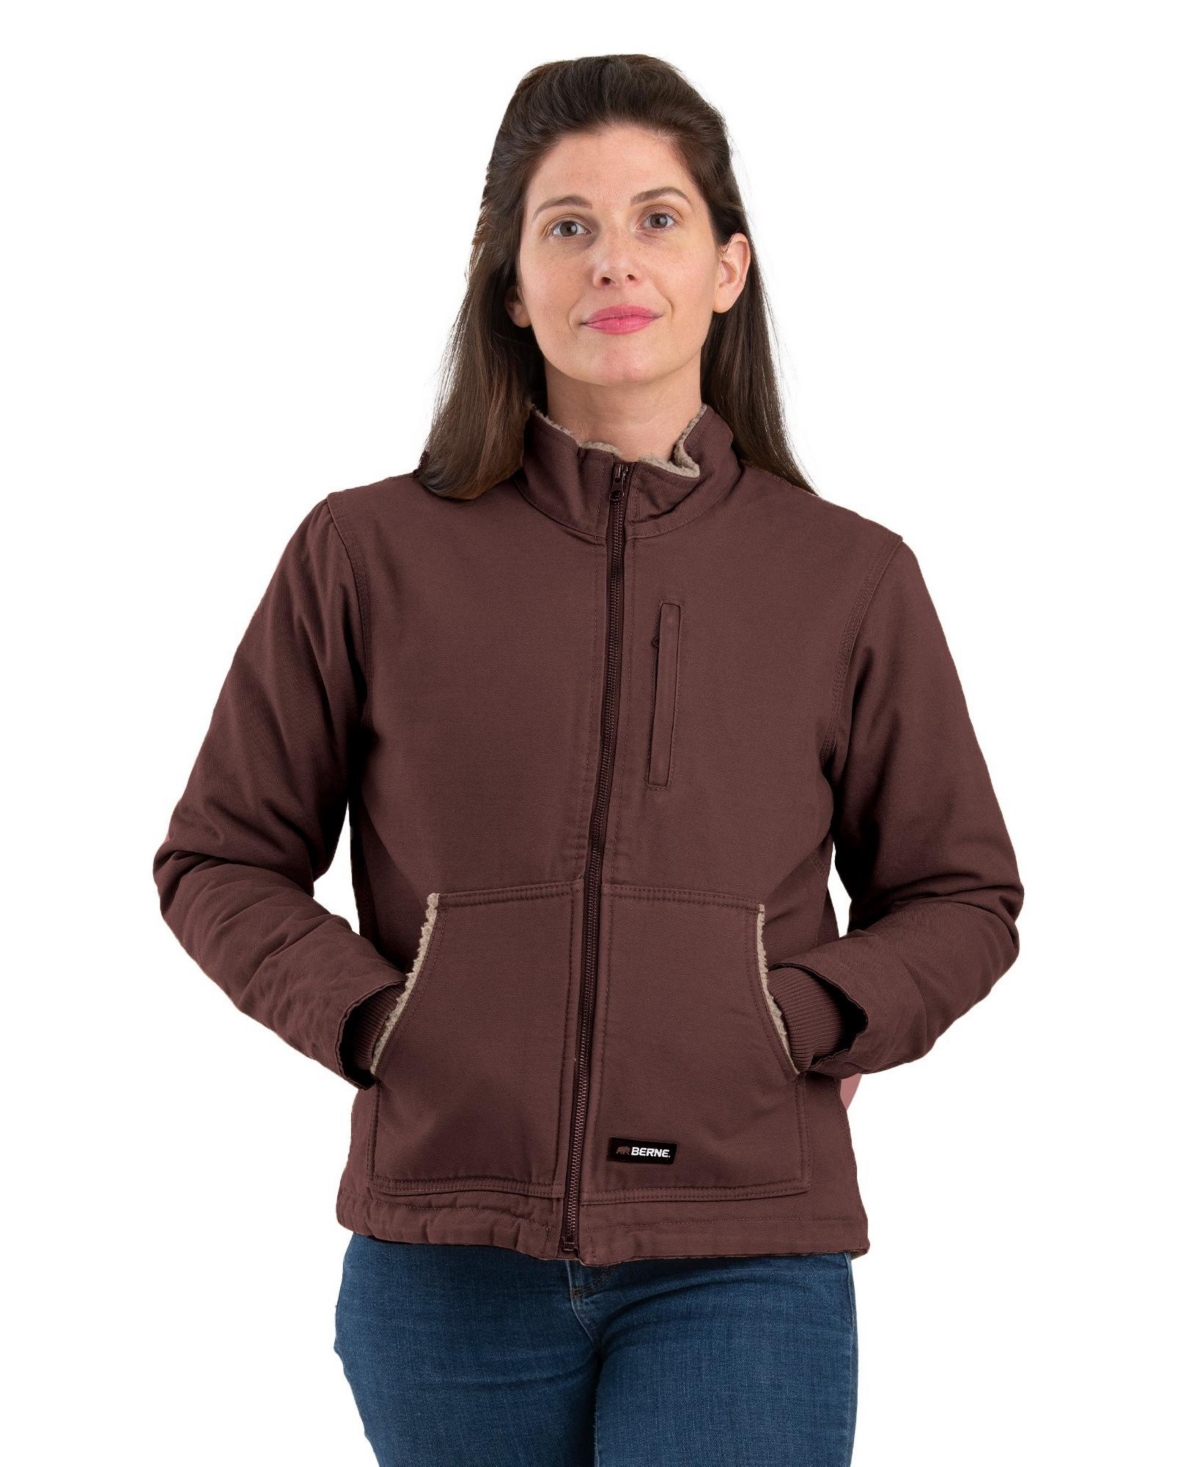 Women's Lined Softstone Duck Jacket - Tuscan